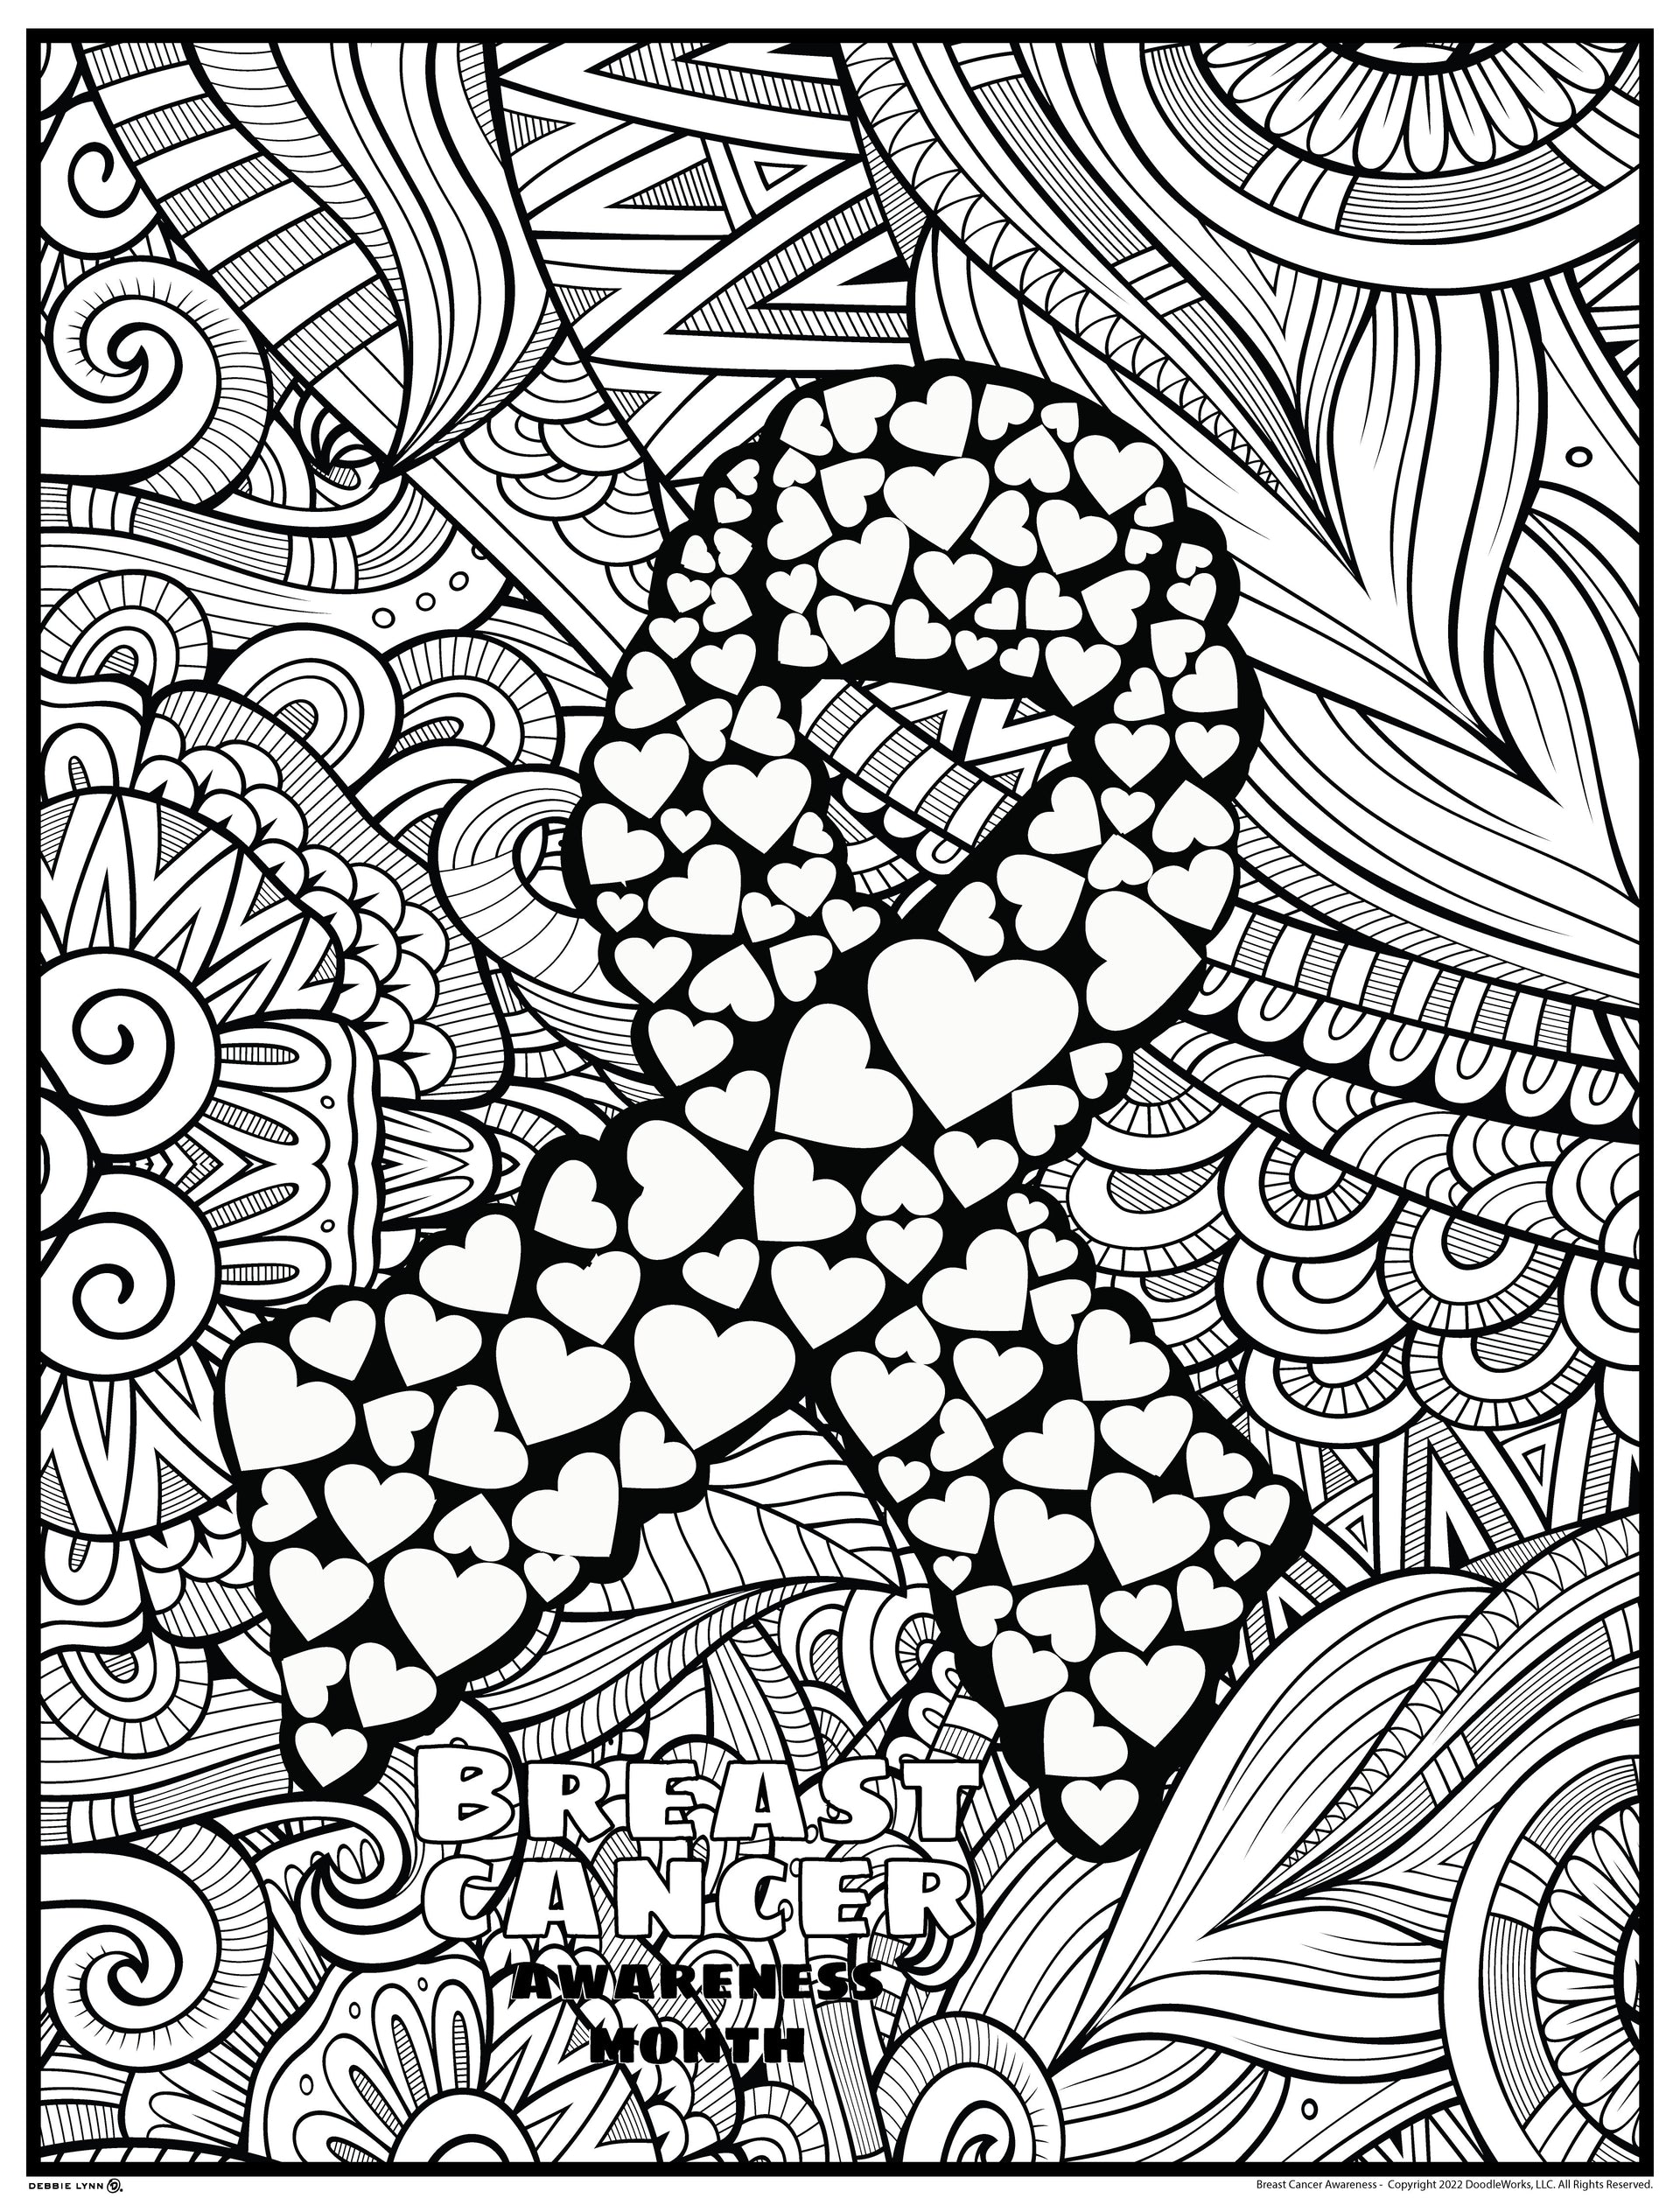 Breast cancer awareness personalized giant coloring poster x â debbie lynn